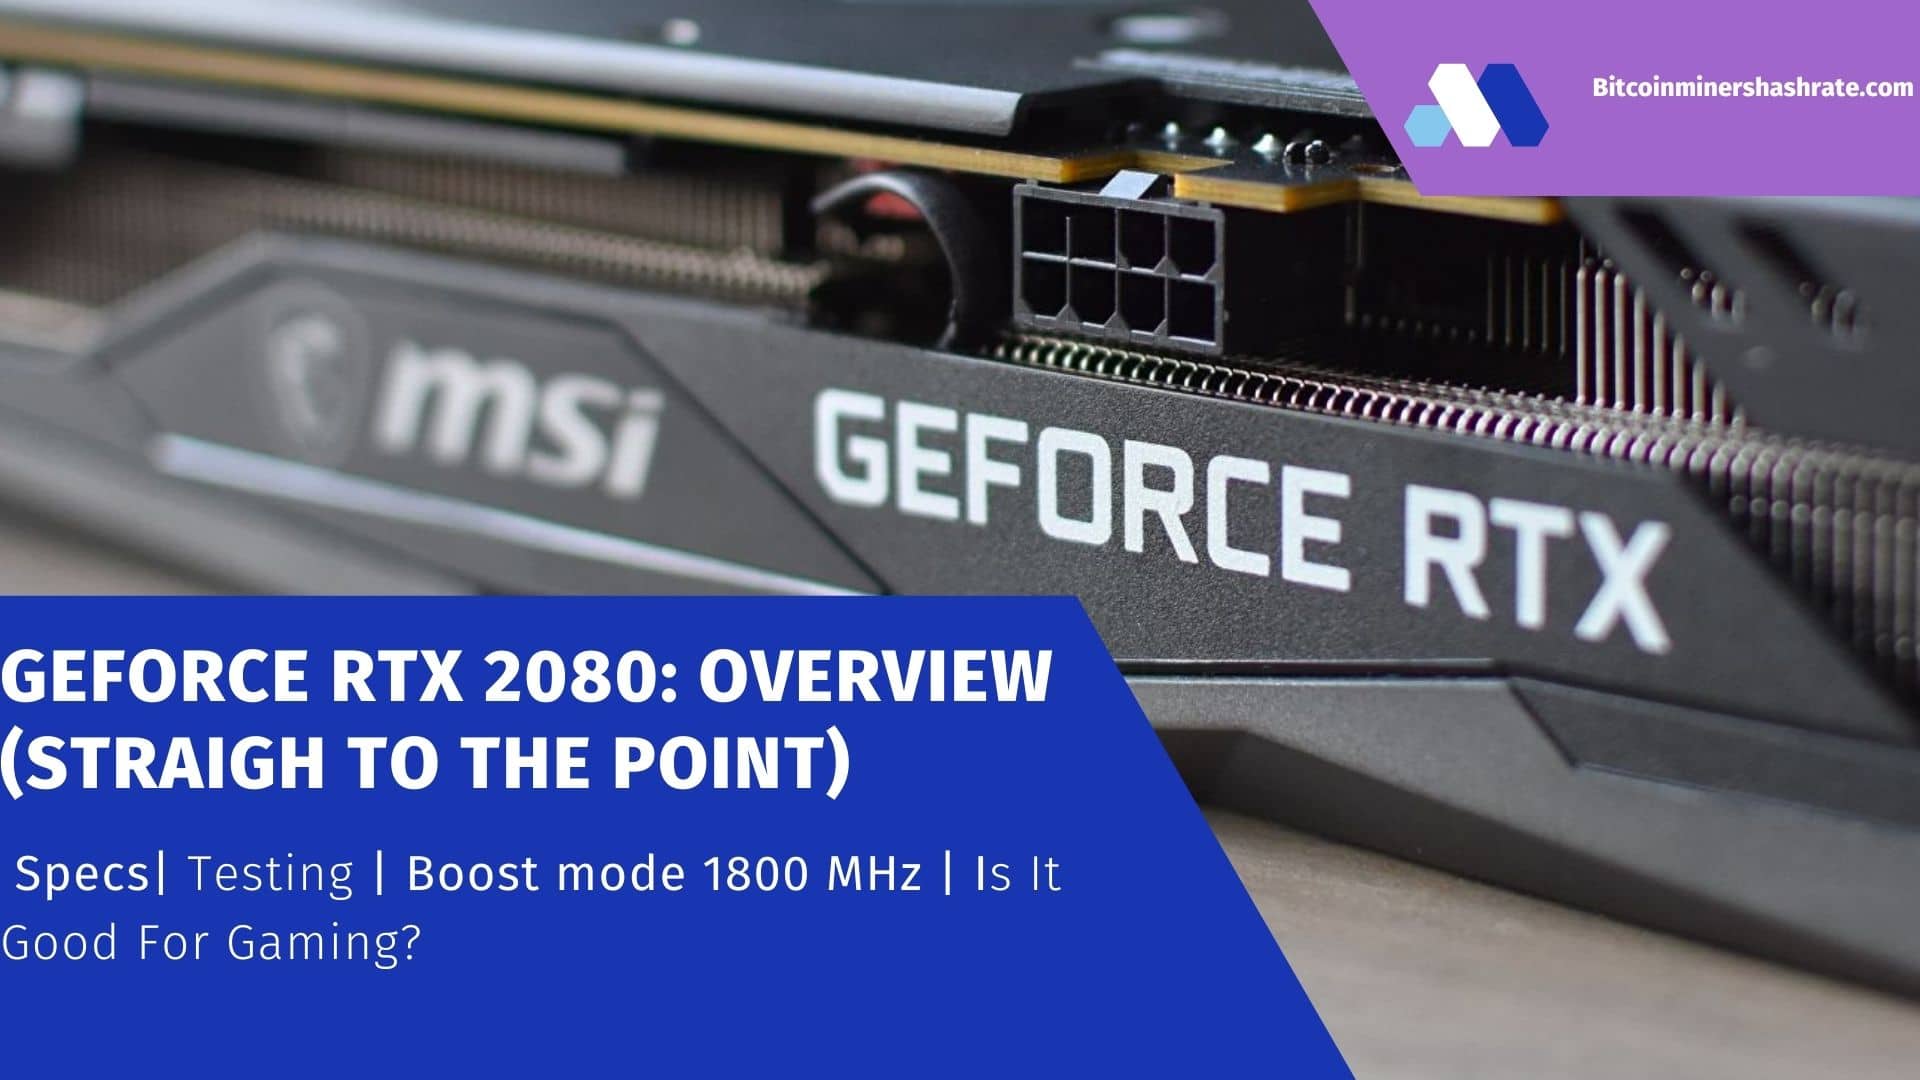 GeForce RTX 2080 - Is it Good for Gaming